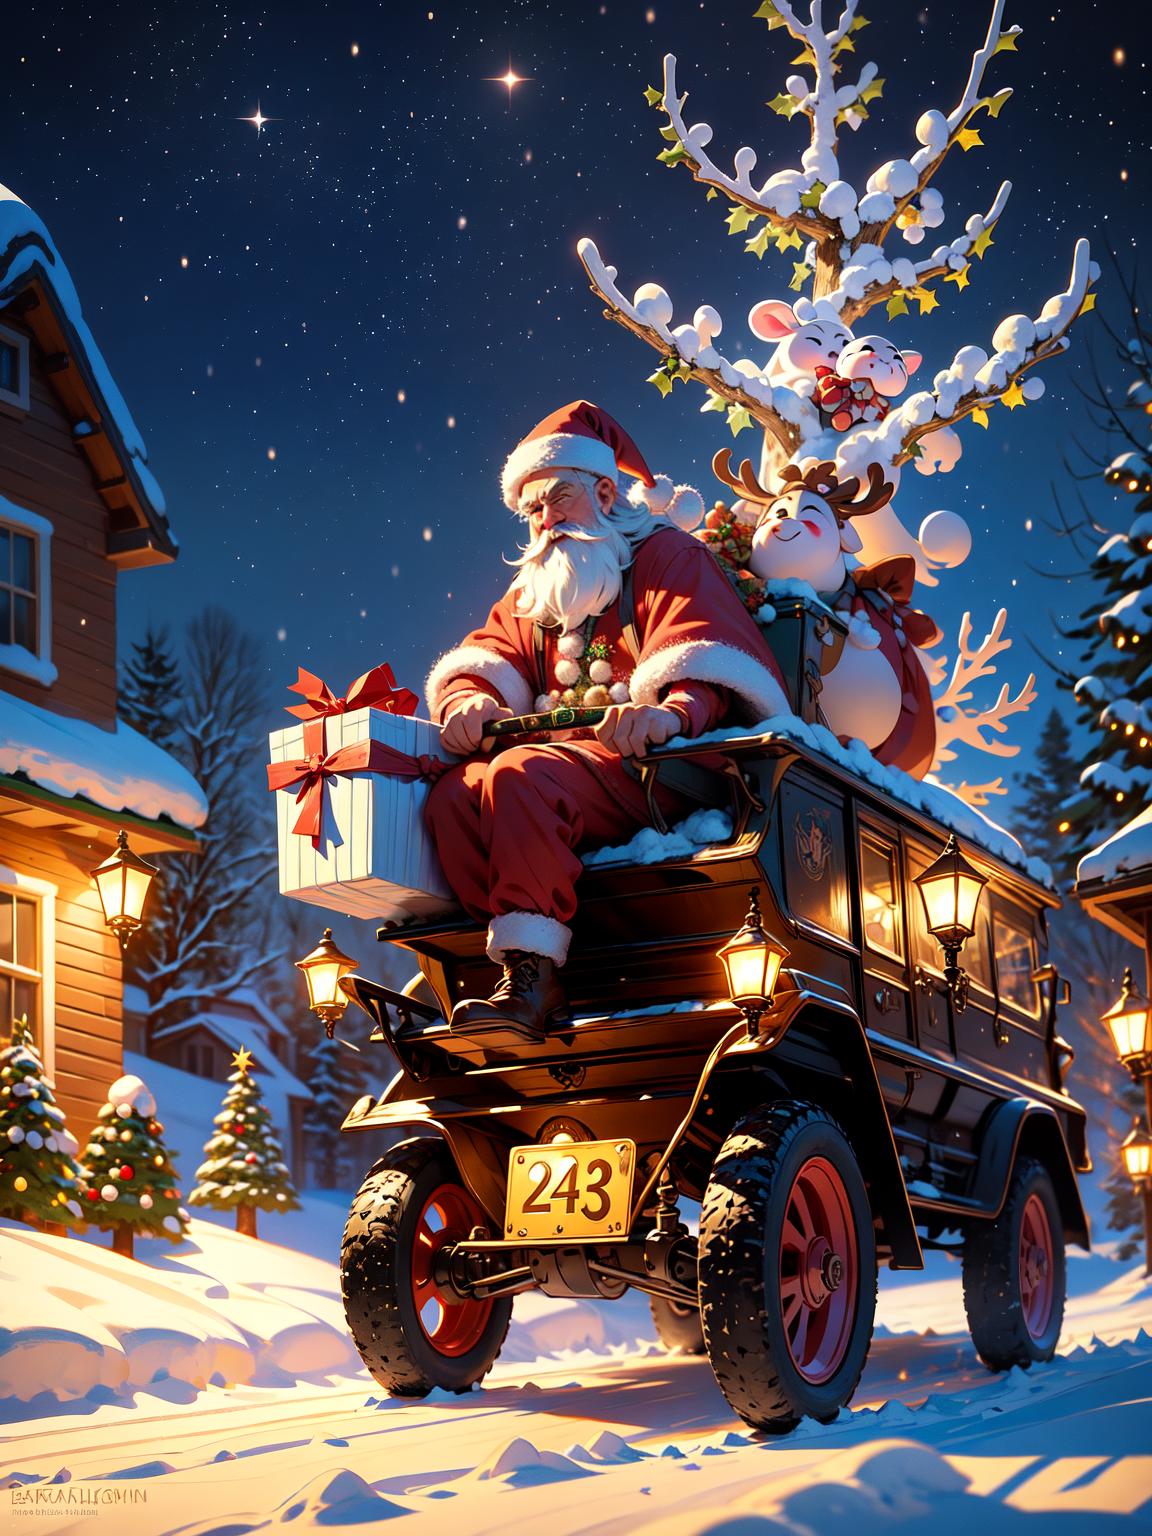  master piece, best quality, ultra detailed, highres, 4k.8k, Santa Claus, Delivering gifts to a house, Jolly, BREAK Santa Claus delivering gifts on Christmas night., Snow covered suburban neighborhood, Sleigh, reindeer, gift bag, chimney, BREAK Magical and festive, Soft glow from streetlights, snowflakes falling, magic particles